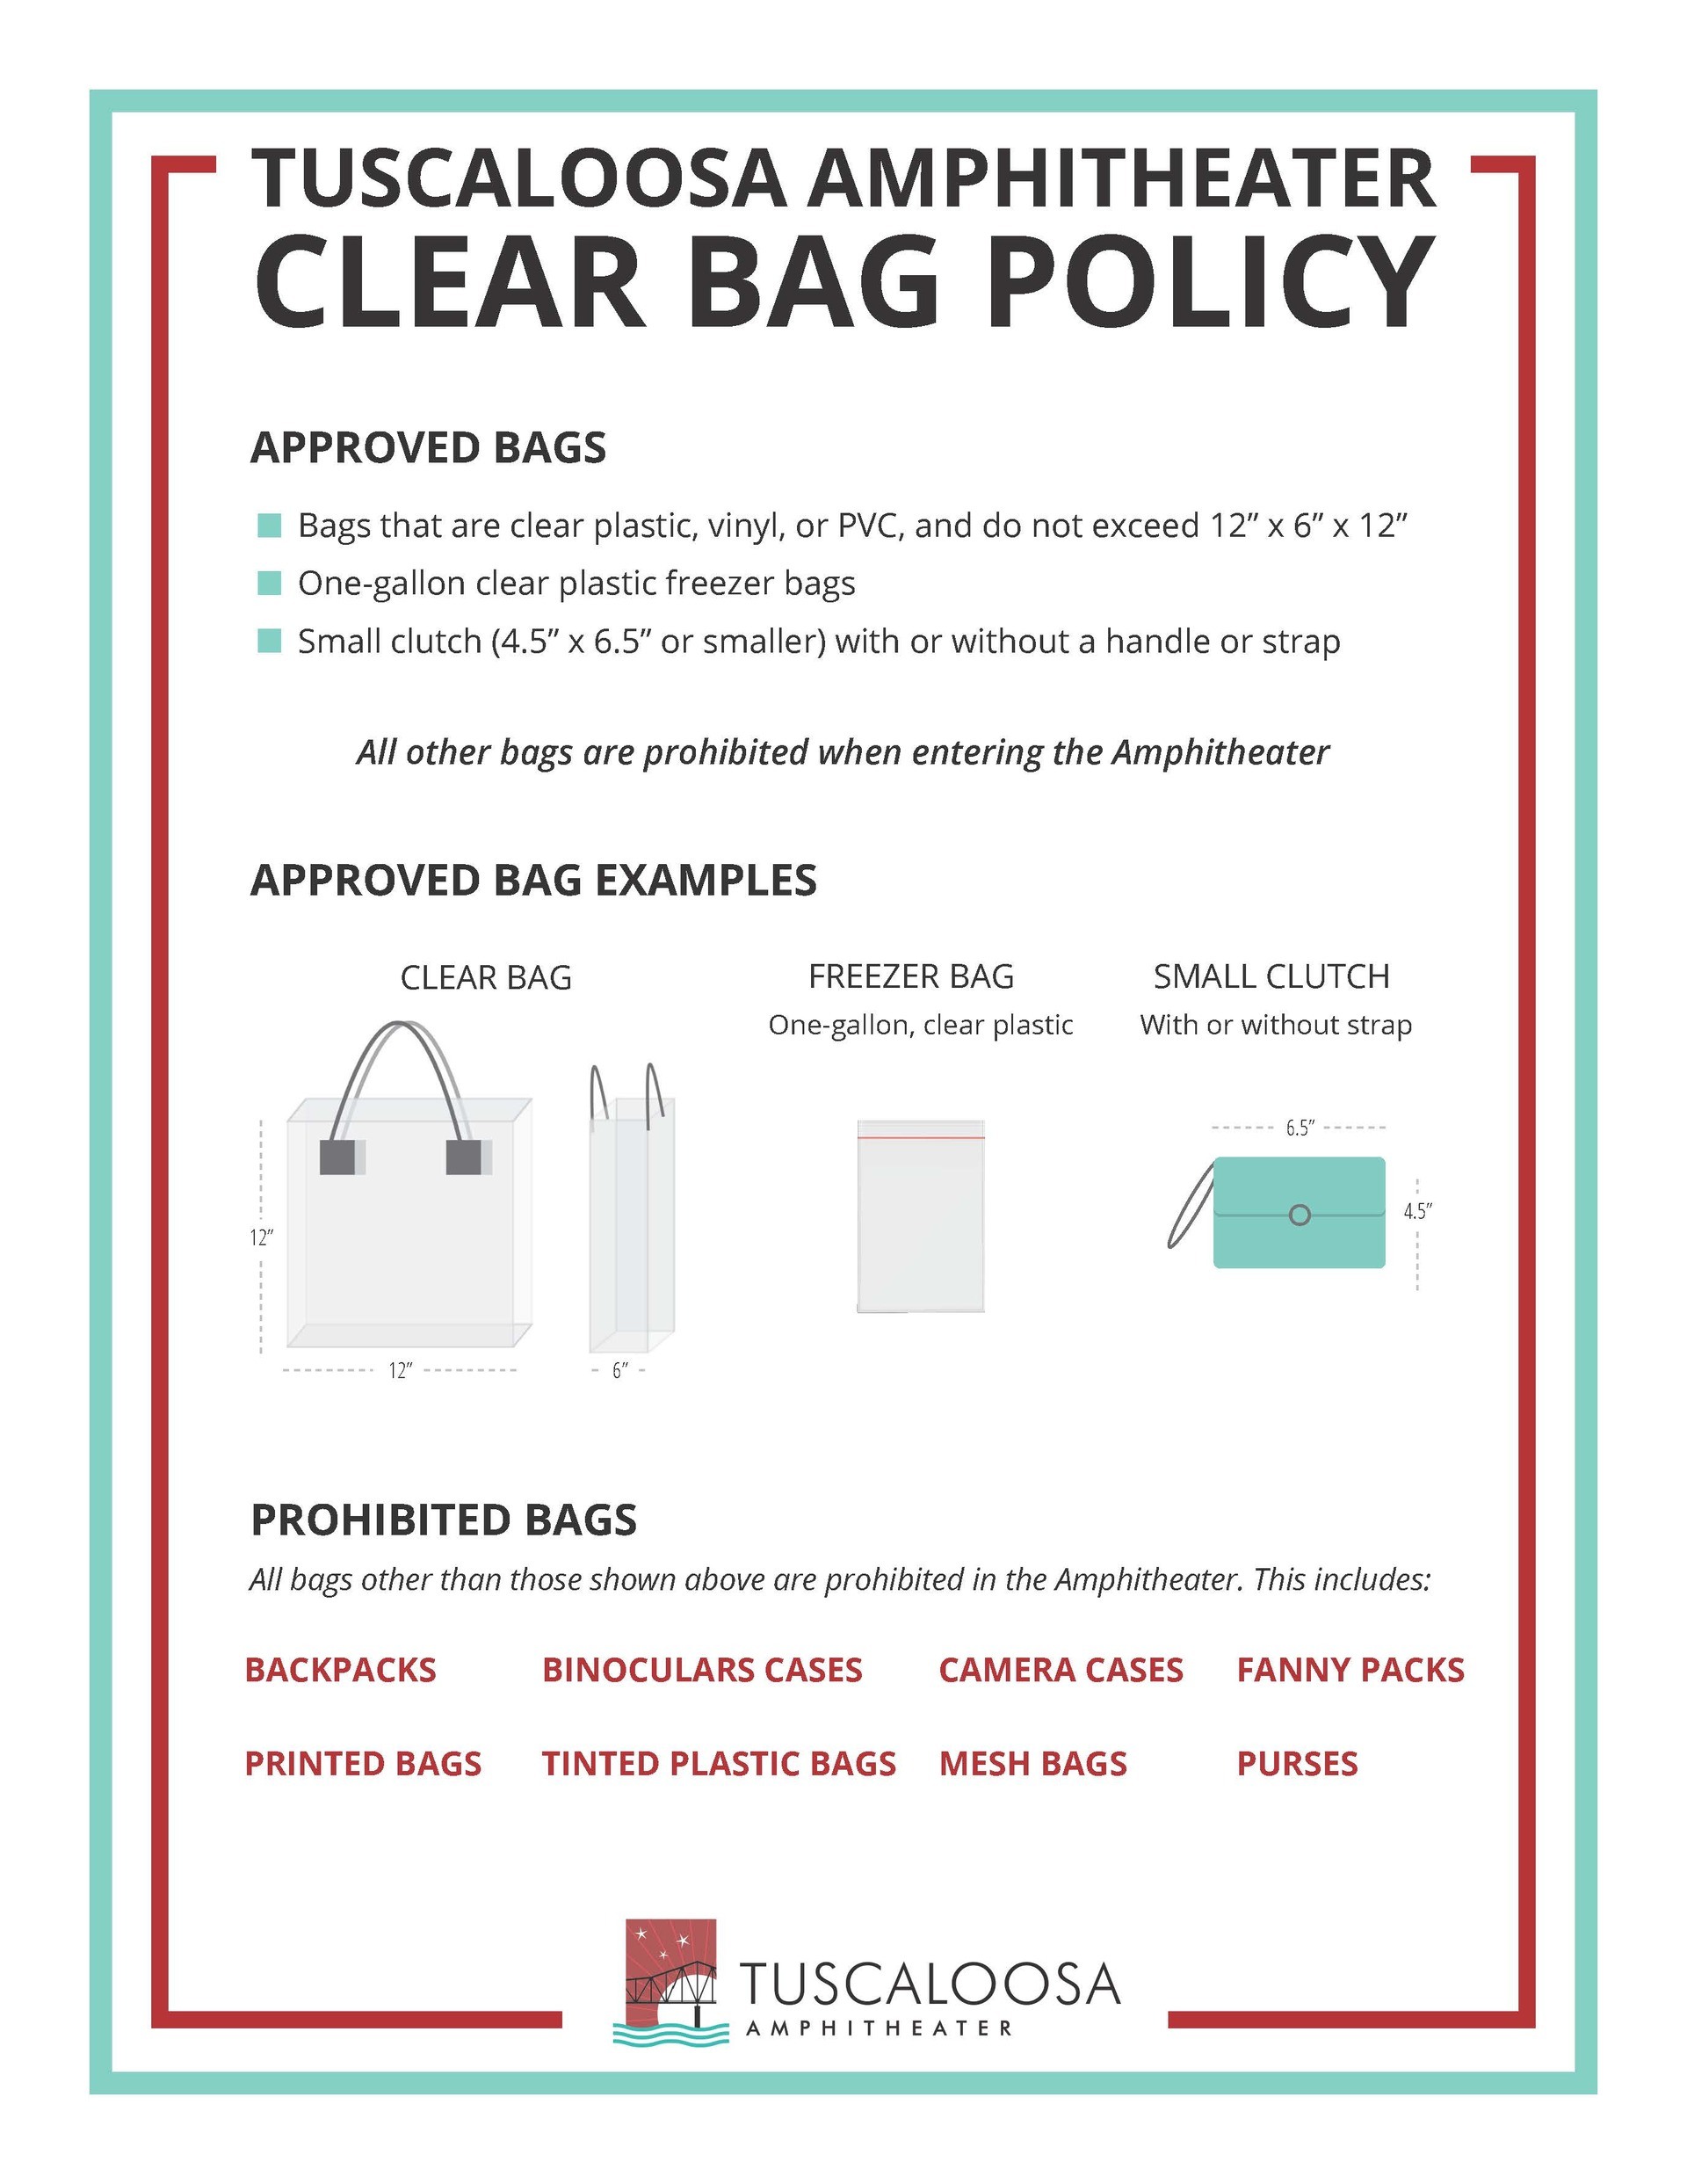 Prohibited Items and Bag Policy